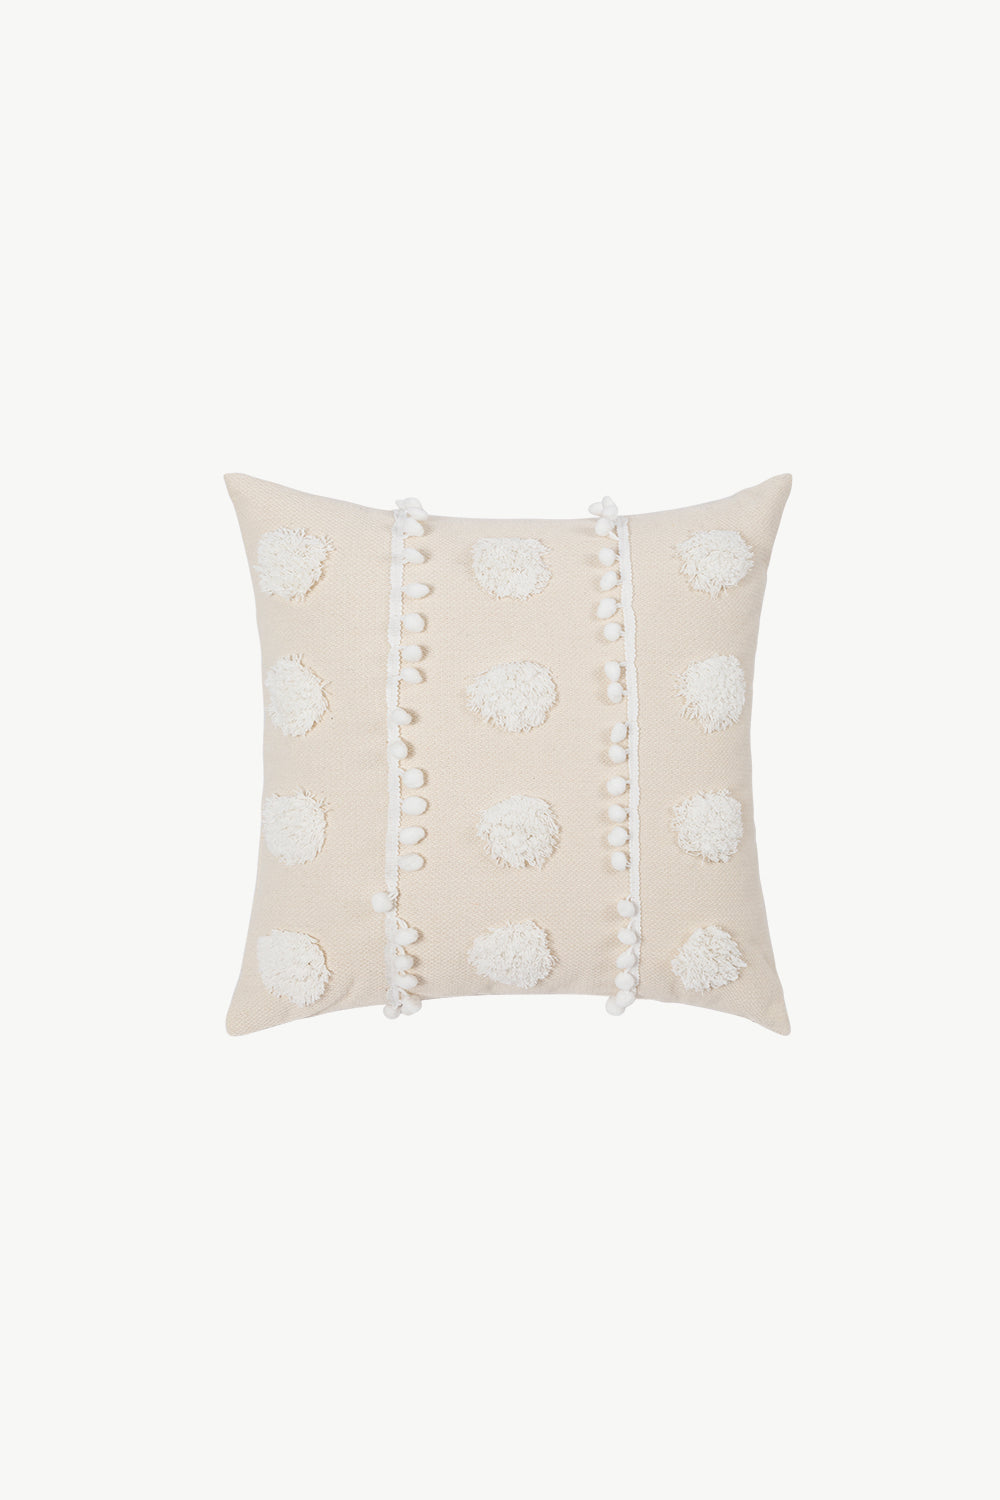 7 Styles Eye-Catching Throw Pillow Cover